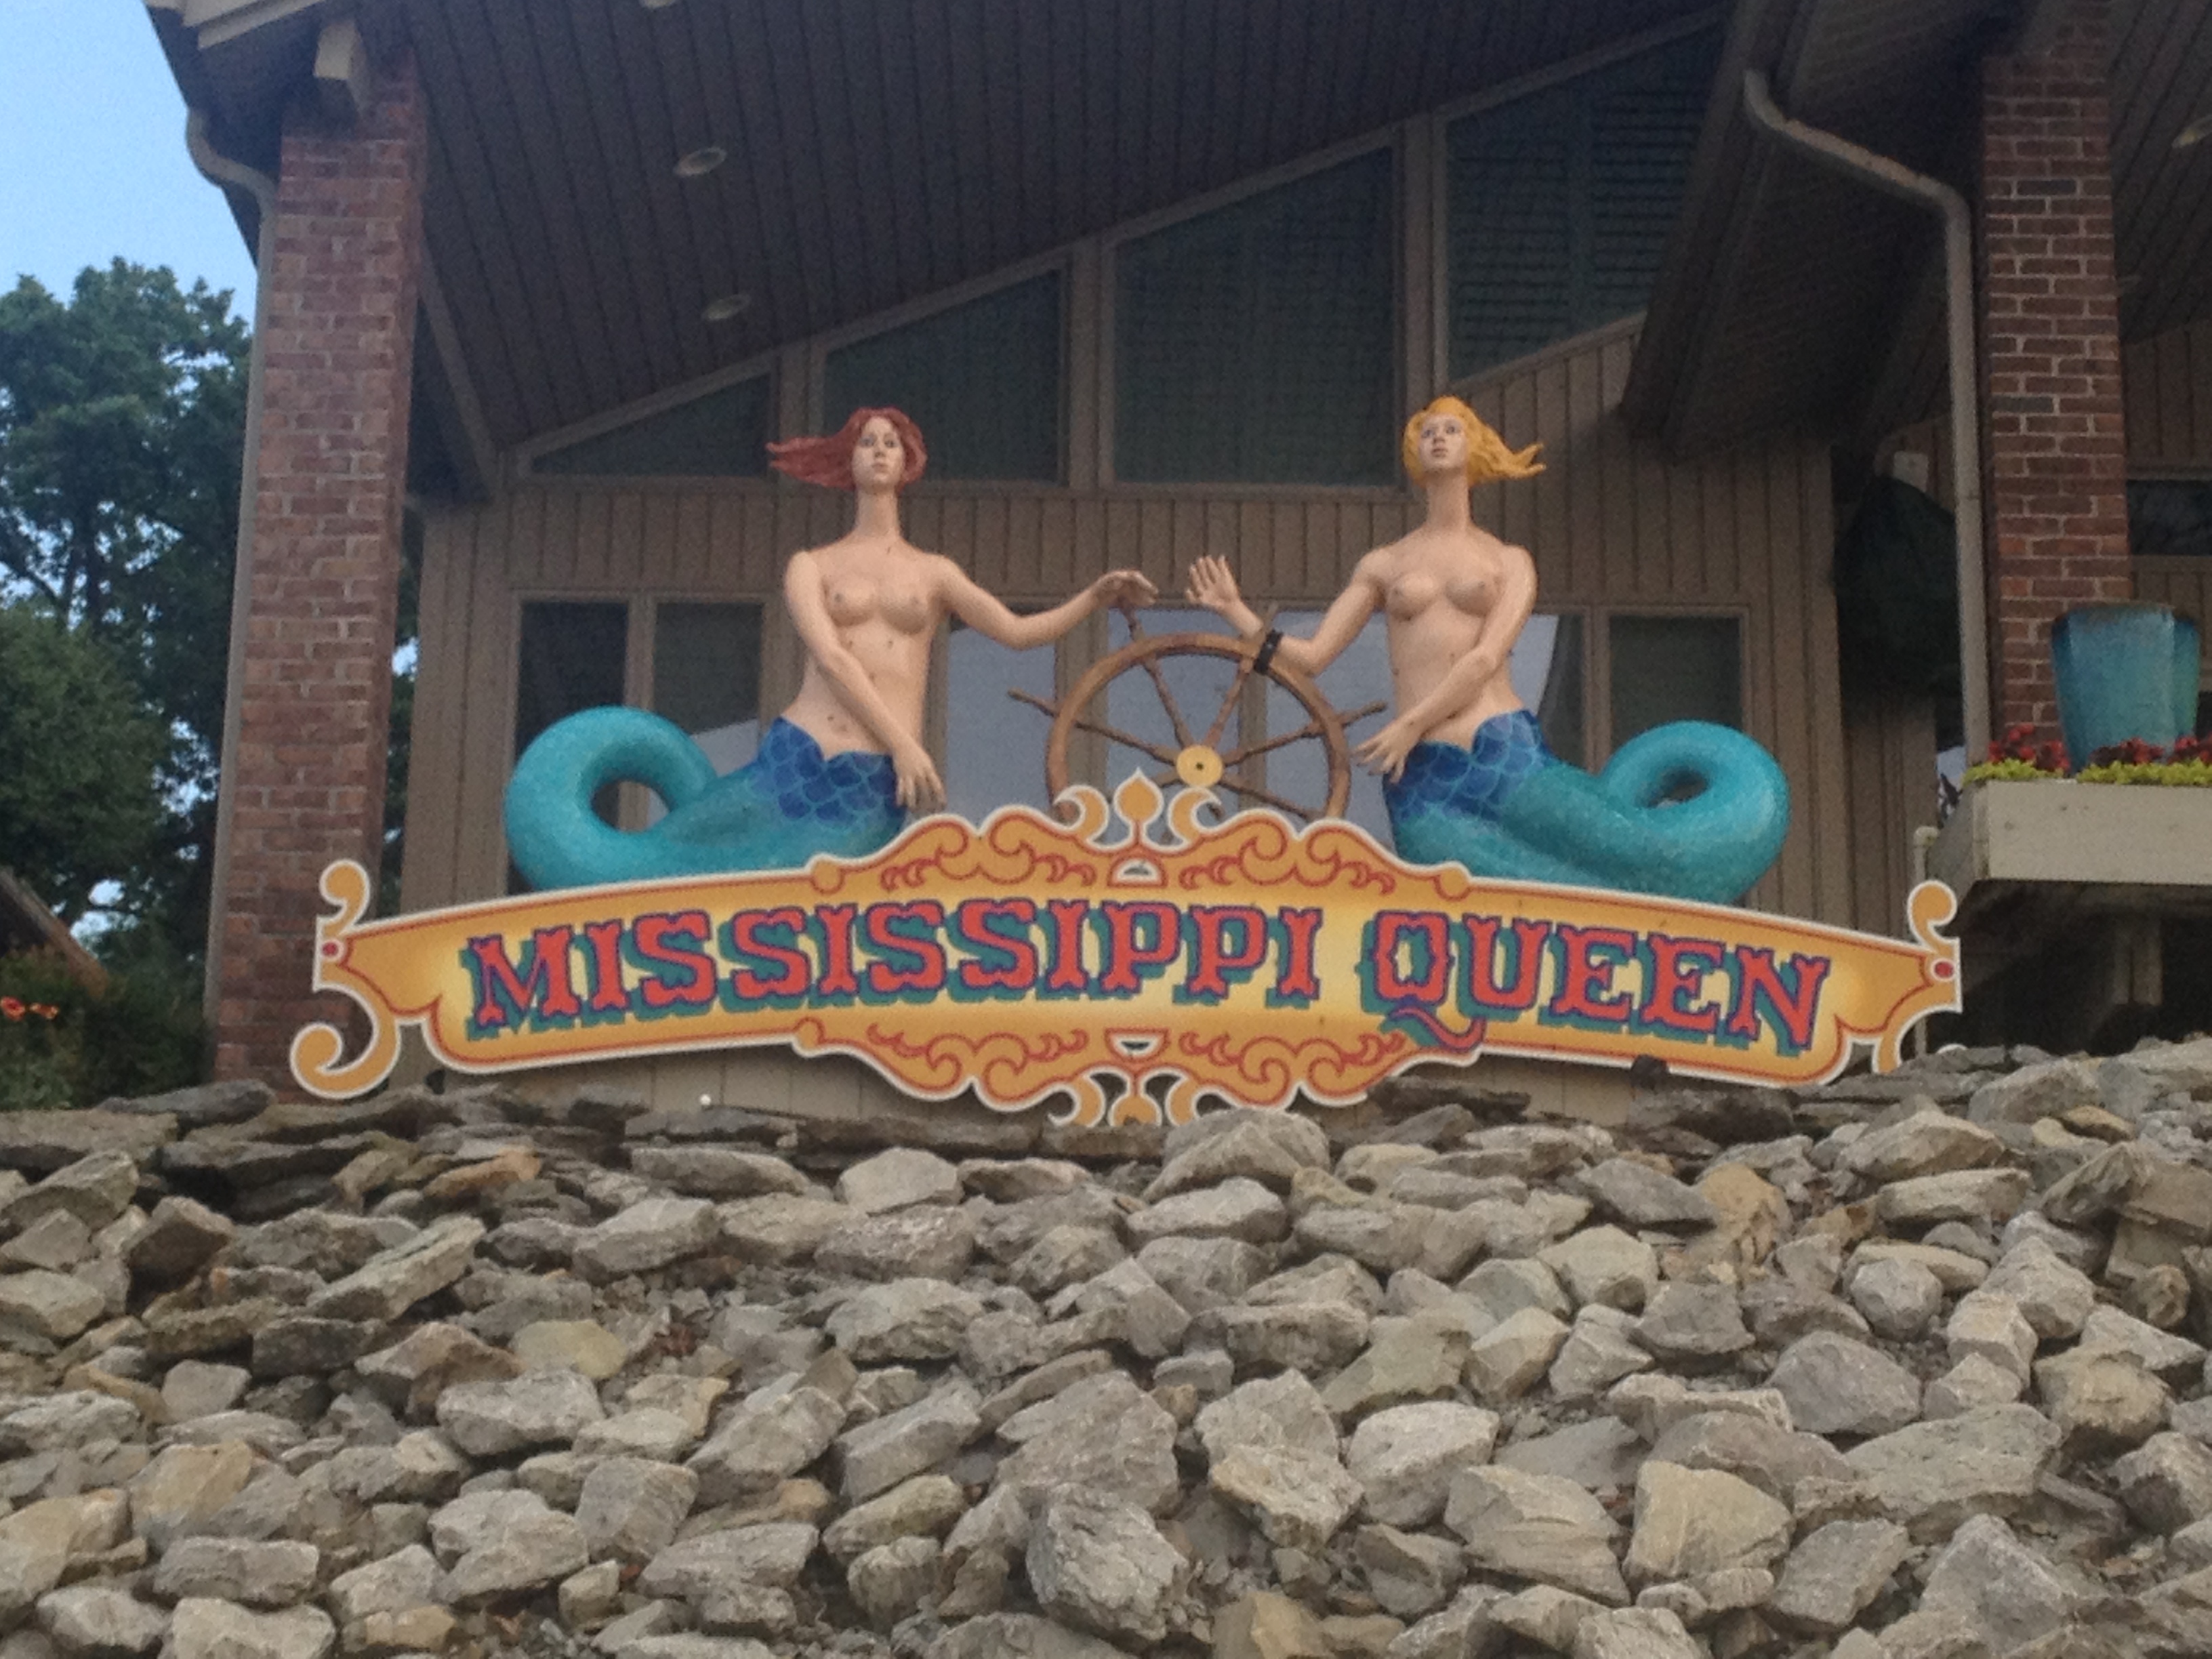 Mermaids and sign 6-25-13